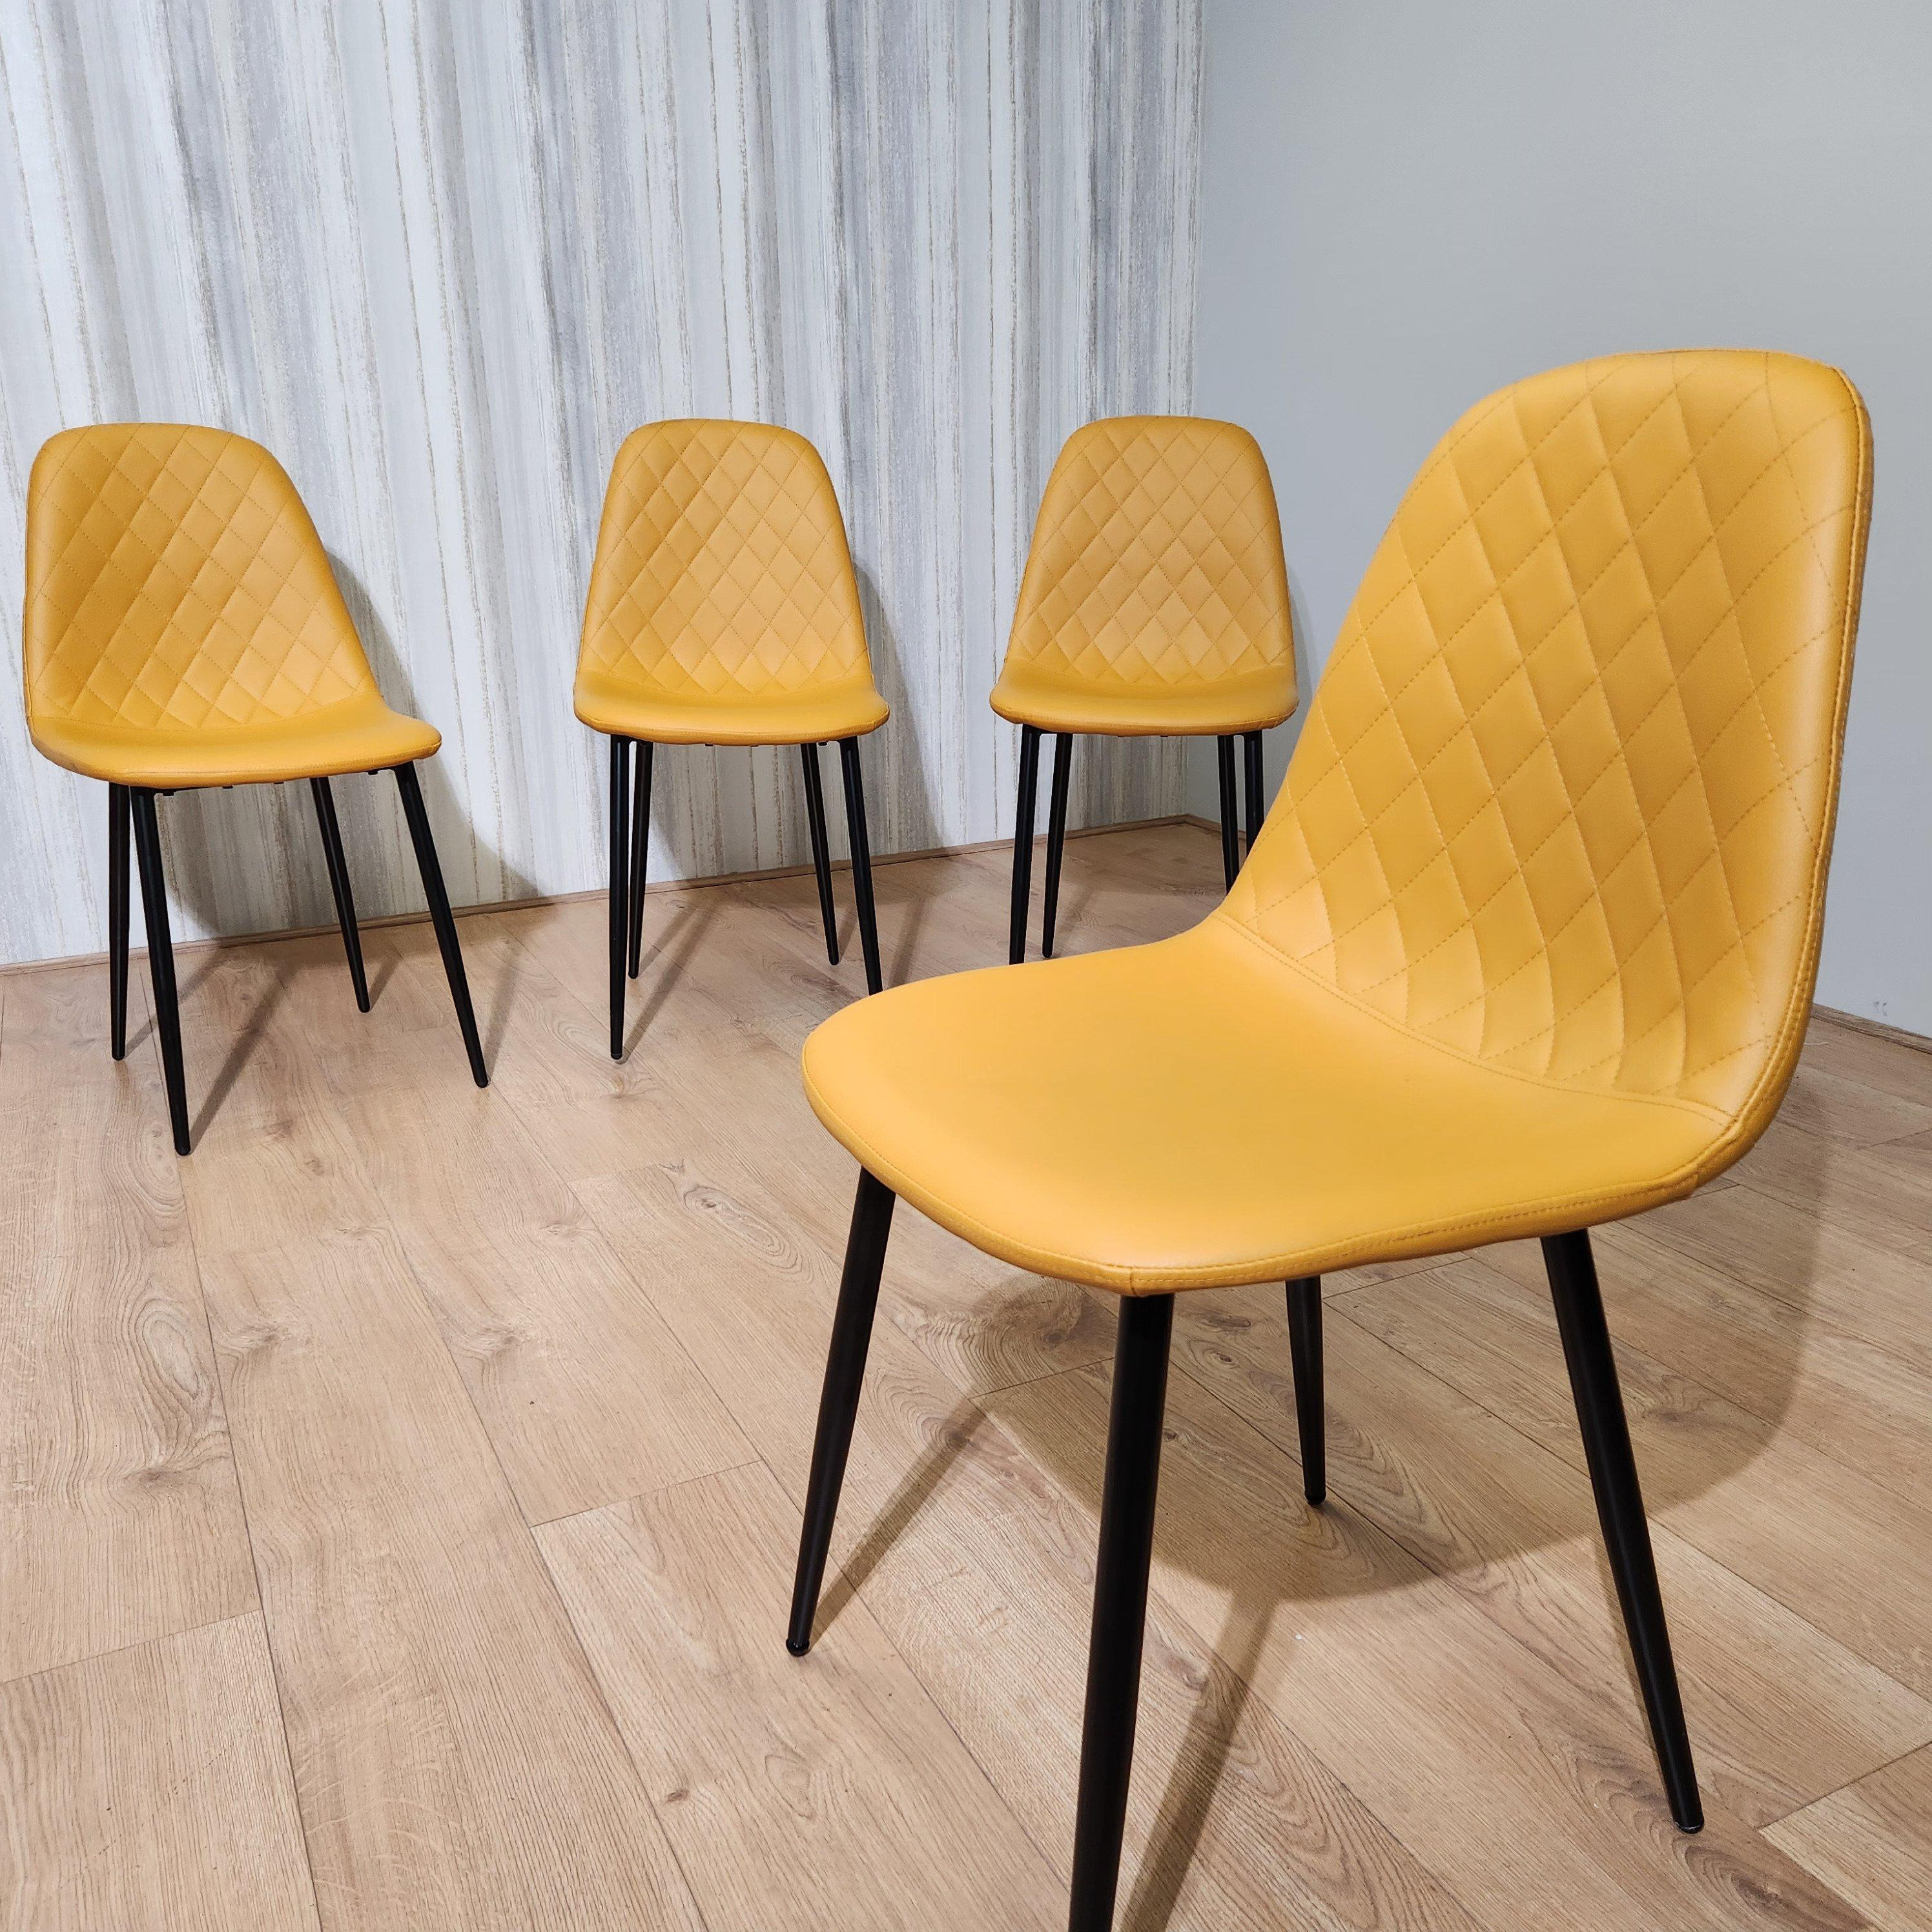 Dining Chairs Set Of 4 Mustard Chairs Stitched Faux Leather Chairs, Soft Padded Seat Living Room Chairs , Kitchen Chairs - image 1